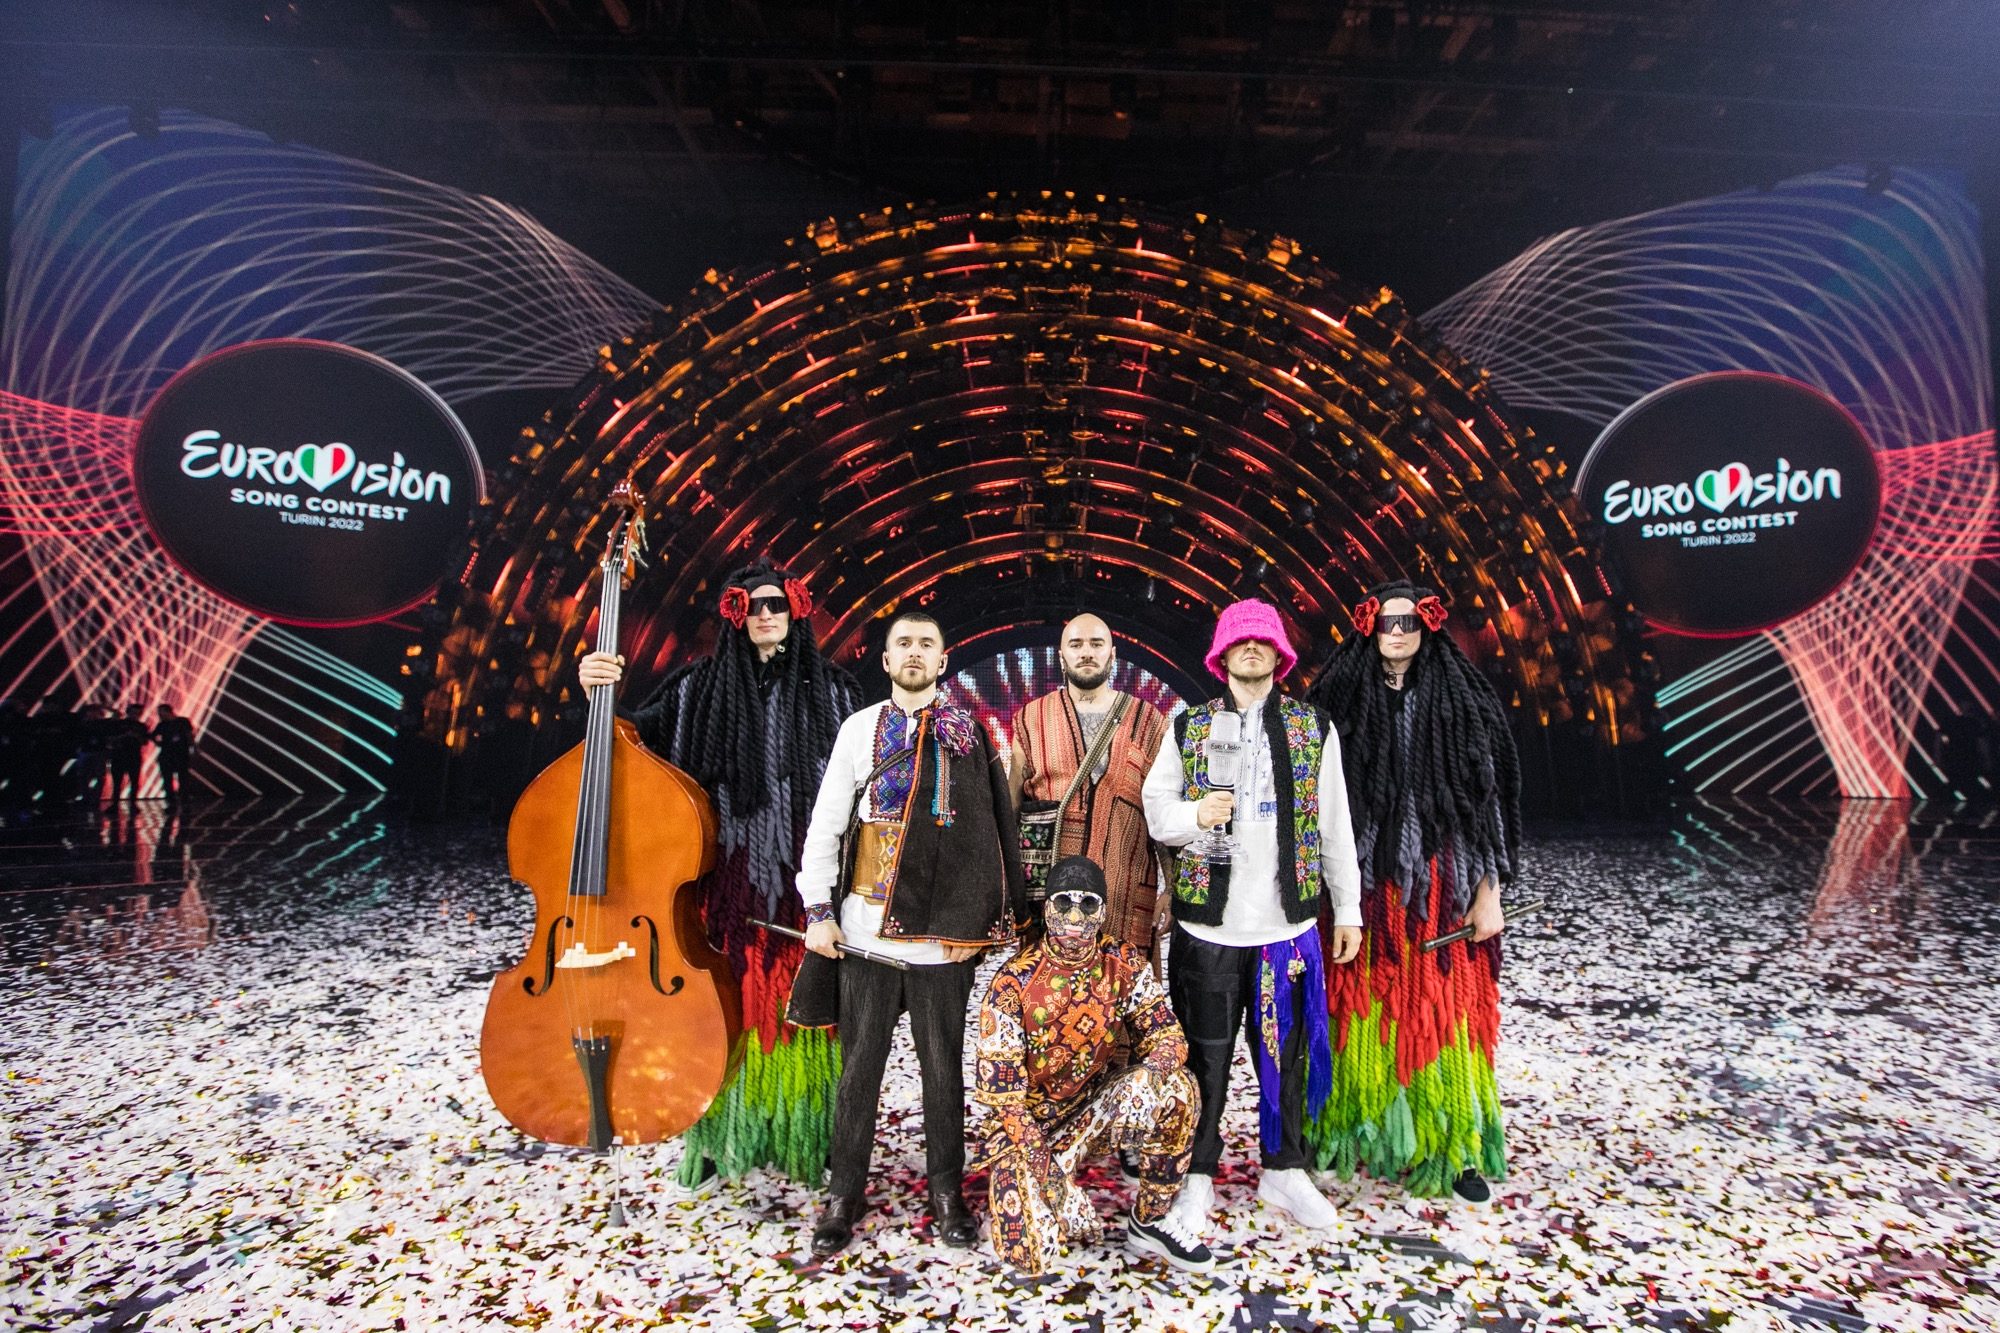 Ukraine’s Klaus Orchestra Wins at the Eurovision Song Contest 2022 Grand Final